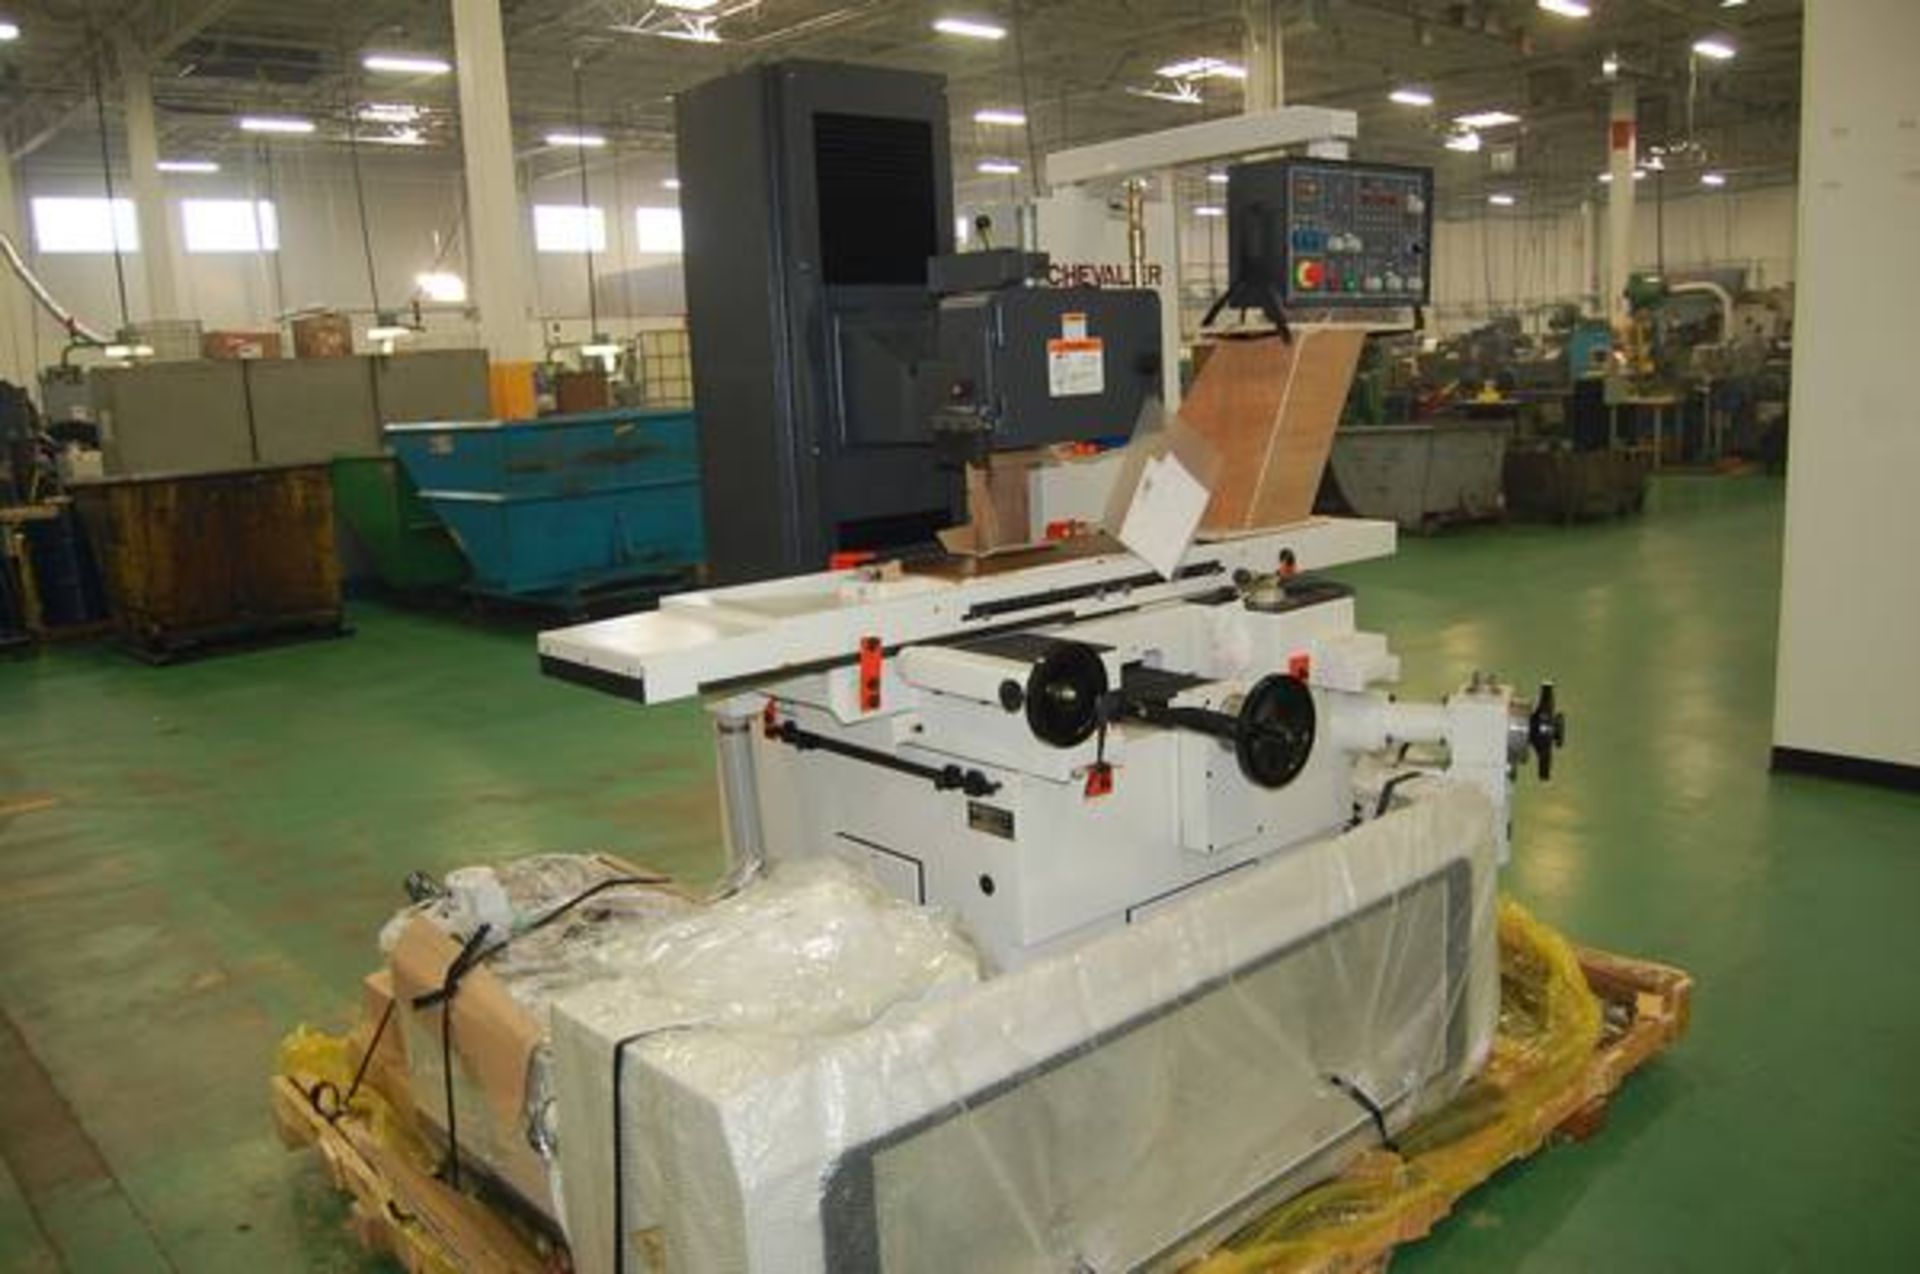 Chevalier Model FSG-3A1224 12" x 24" Hydraulic Automatic Surface Grinder; Serial Number: - Image 2 of 4